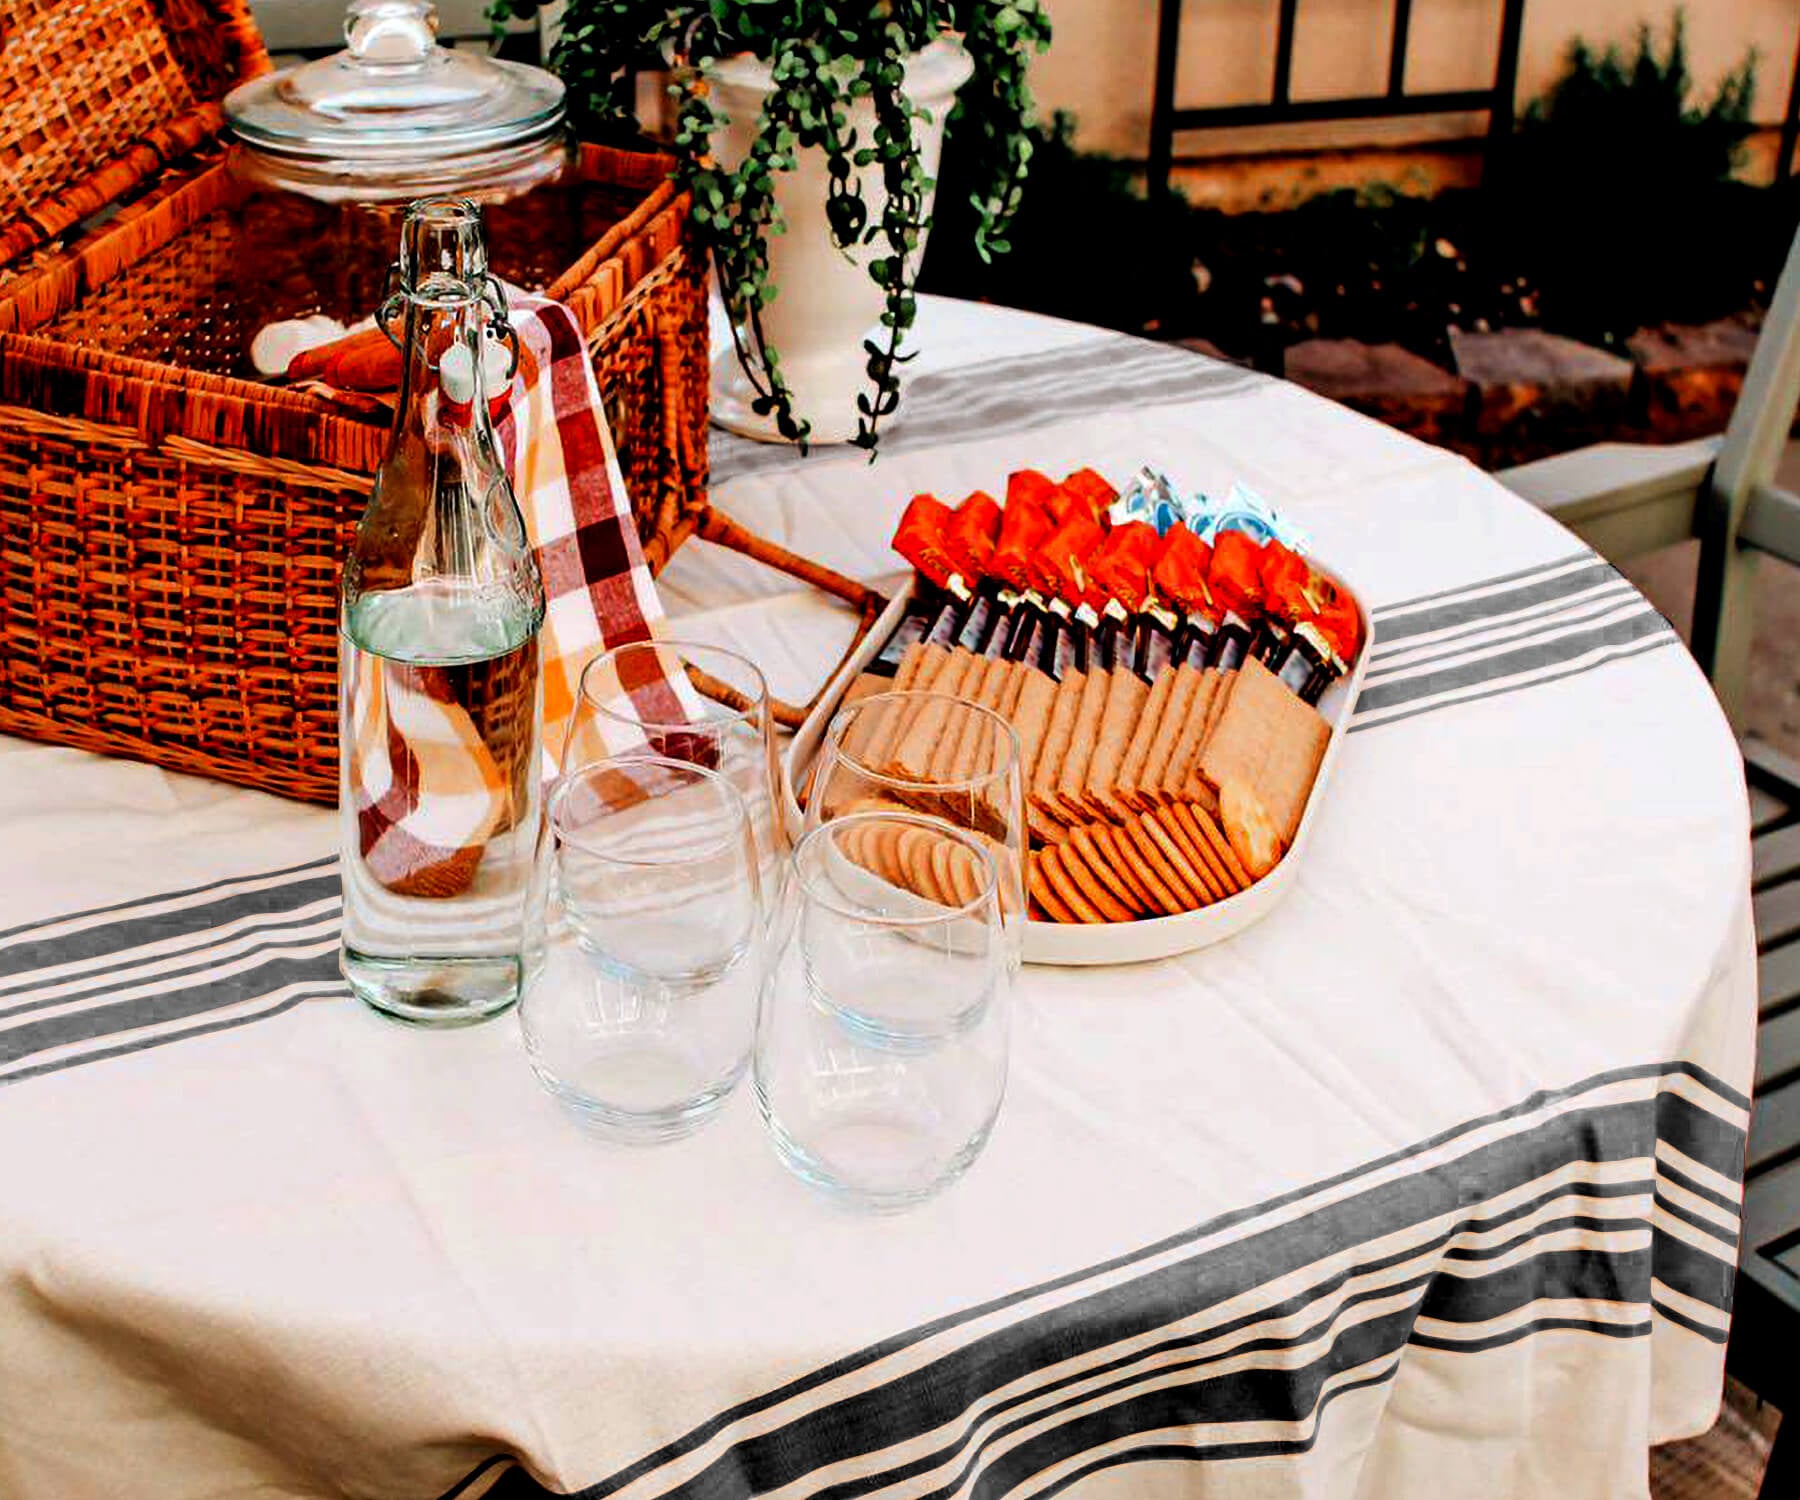 Round outdoor tablecloth on a table with a picnic setup of food and wine